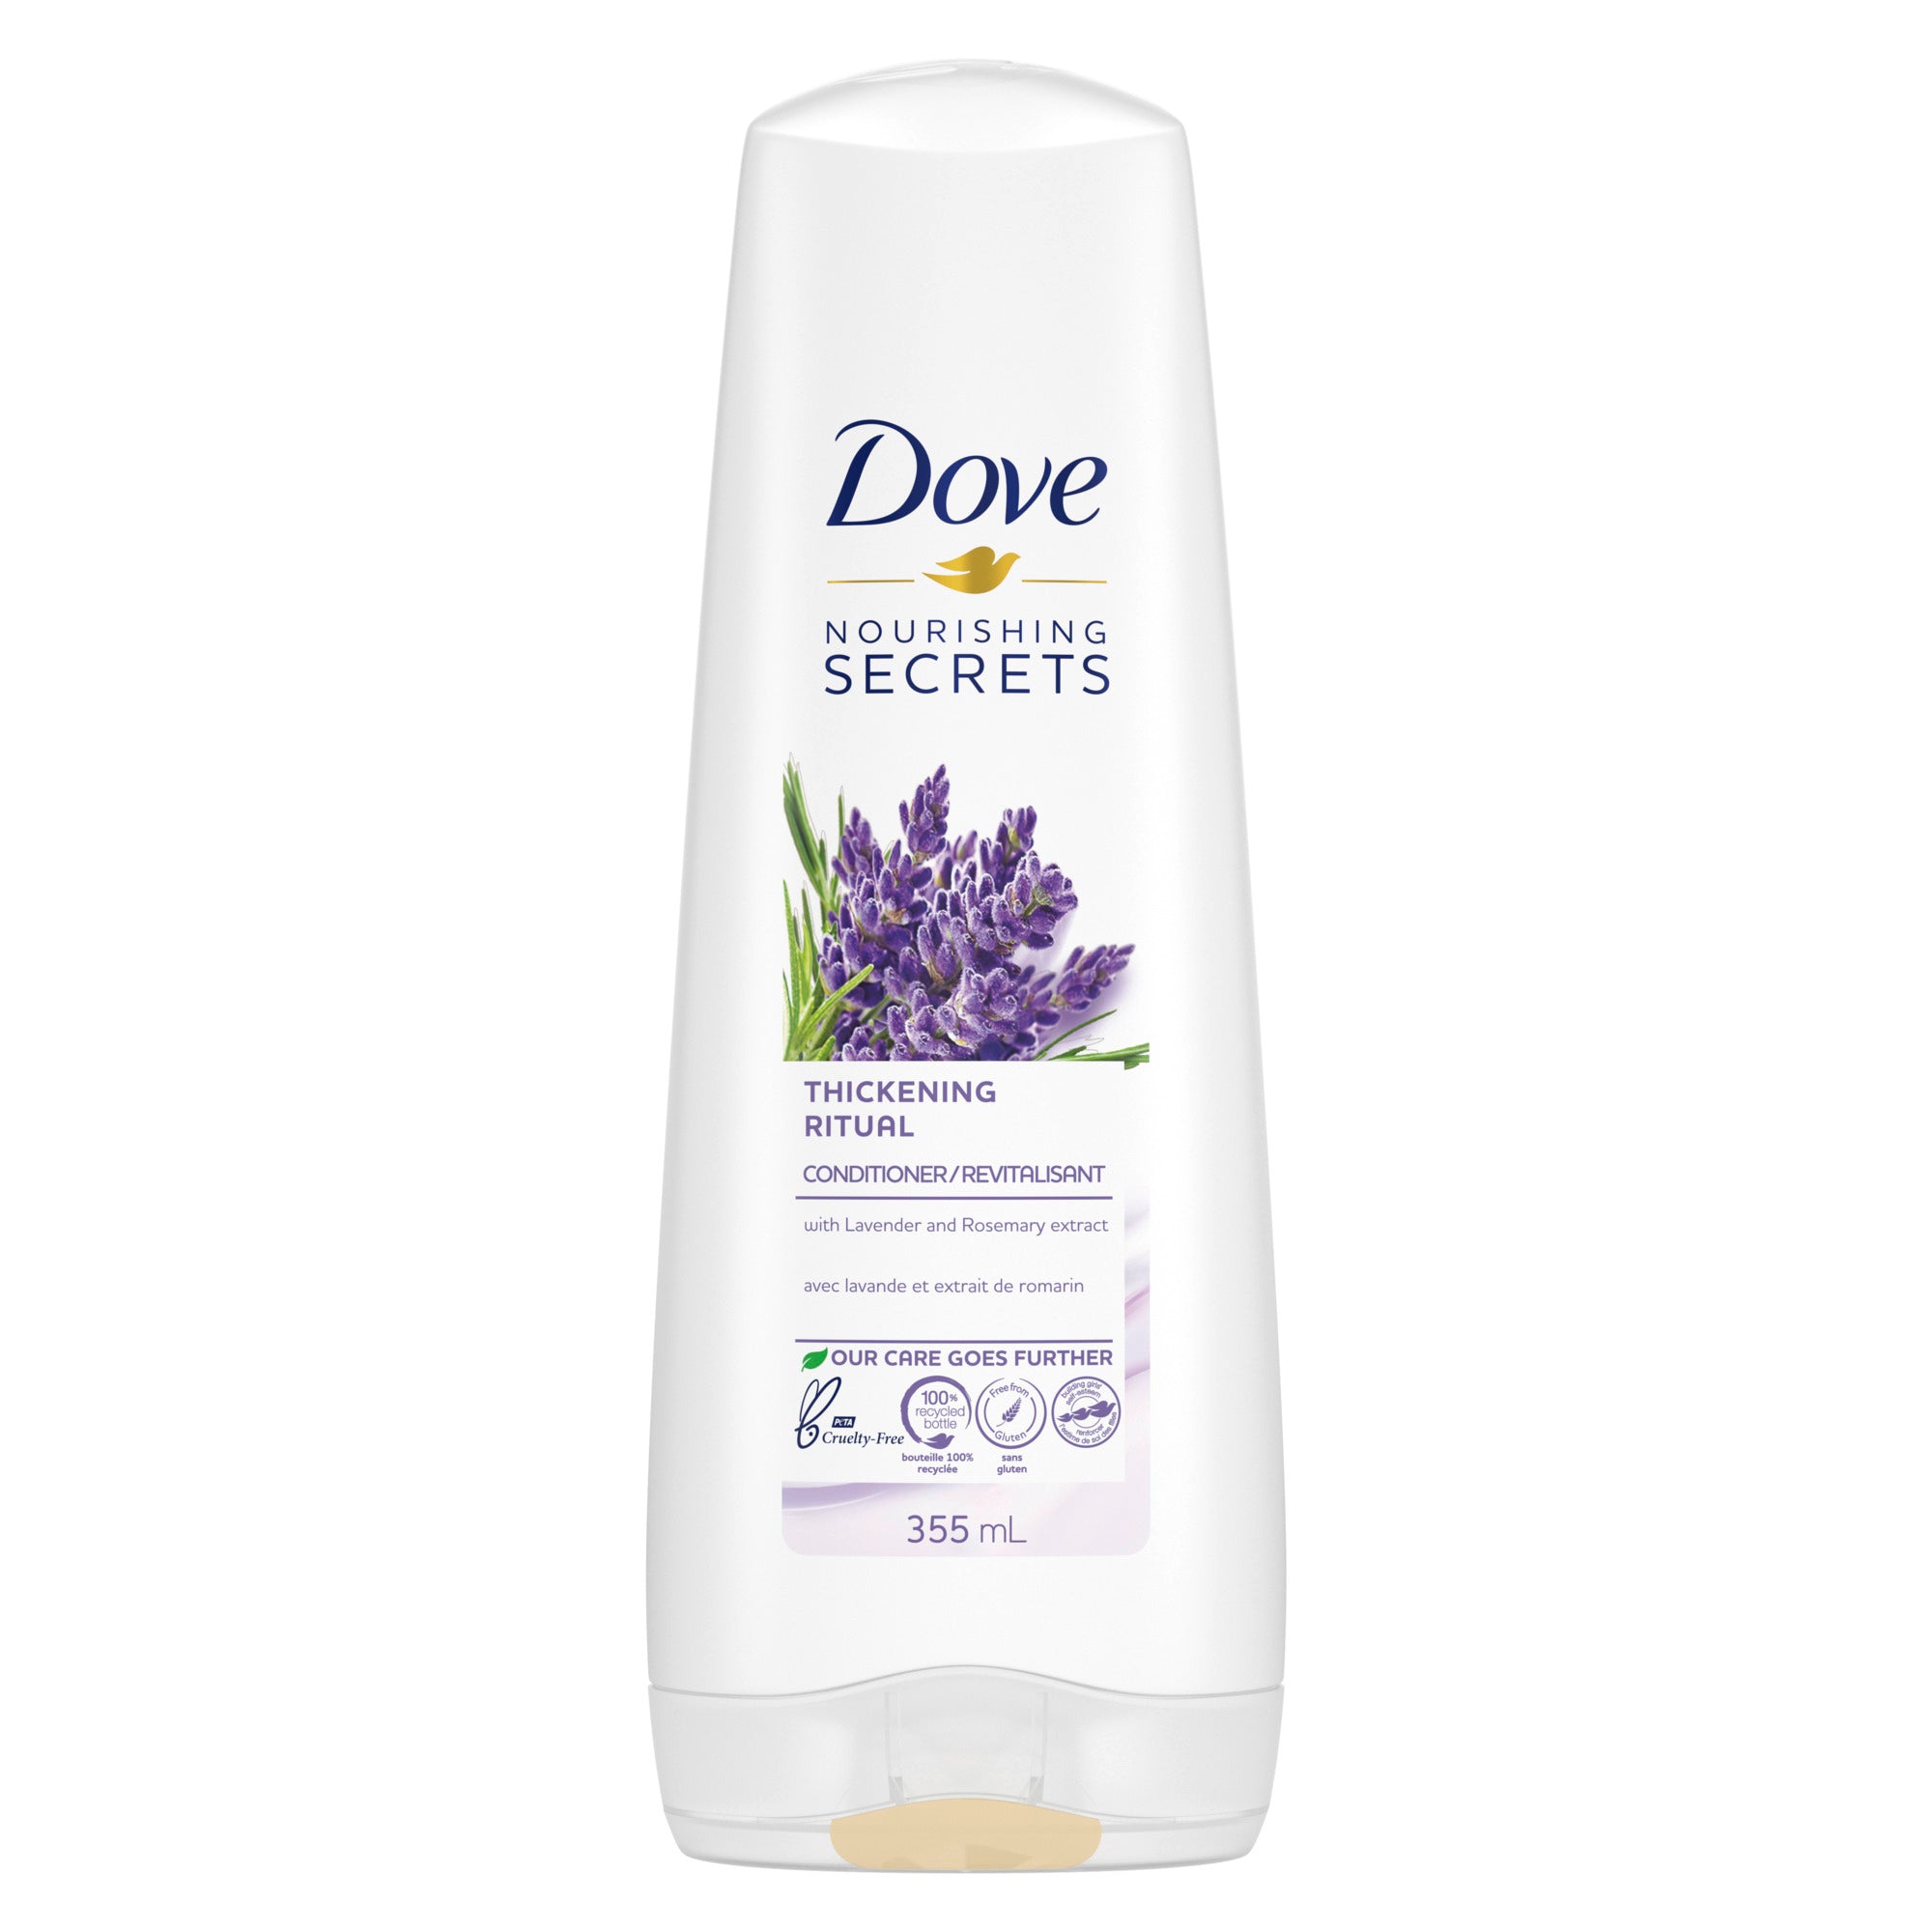 Showing the front angle view of the Dove Thickening Ritual Lavender Conditioner 355ml product.